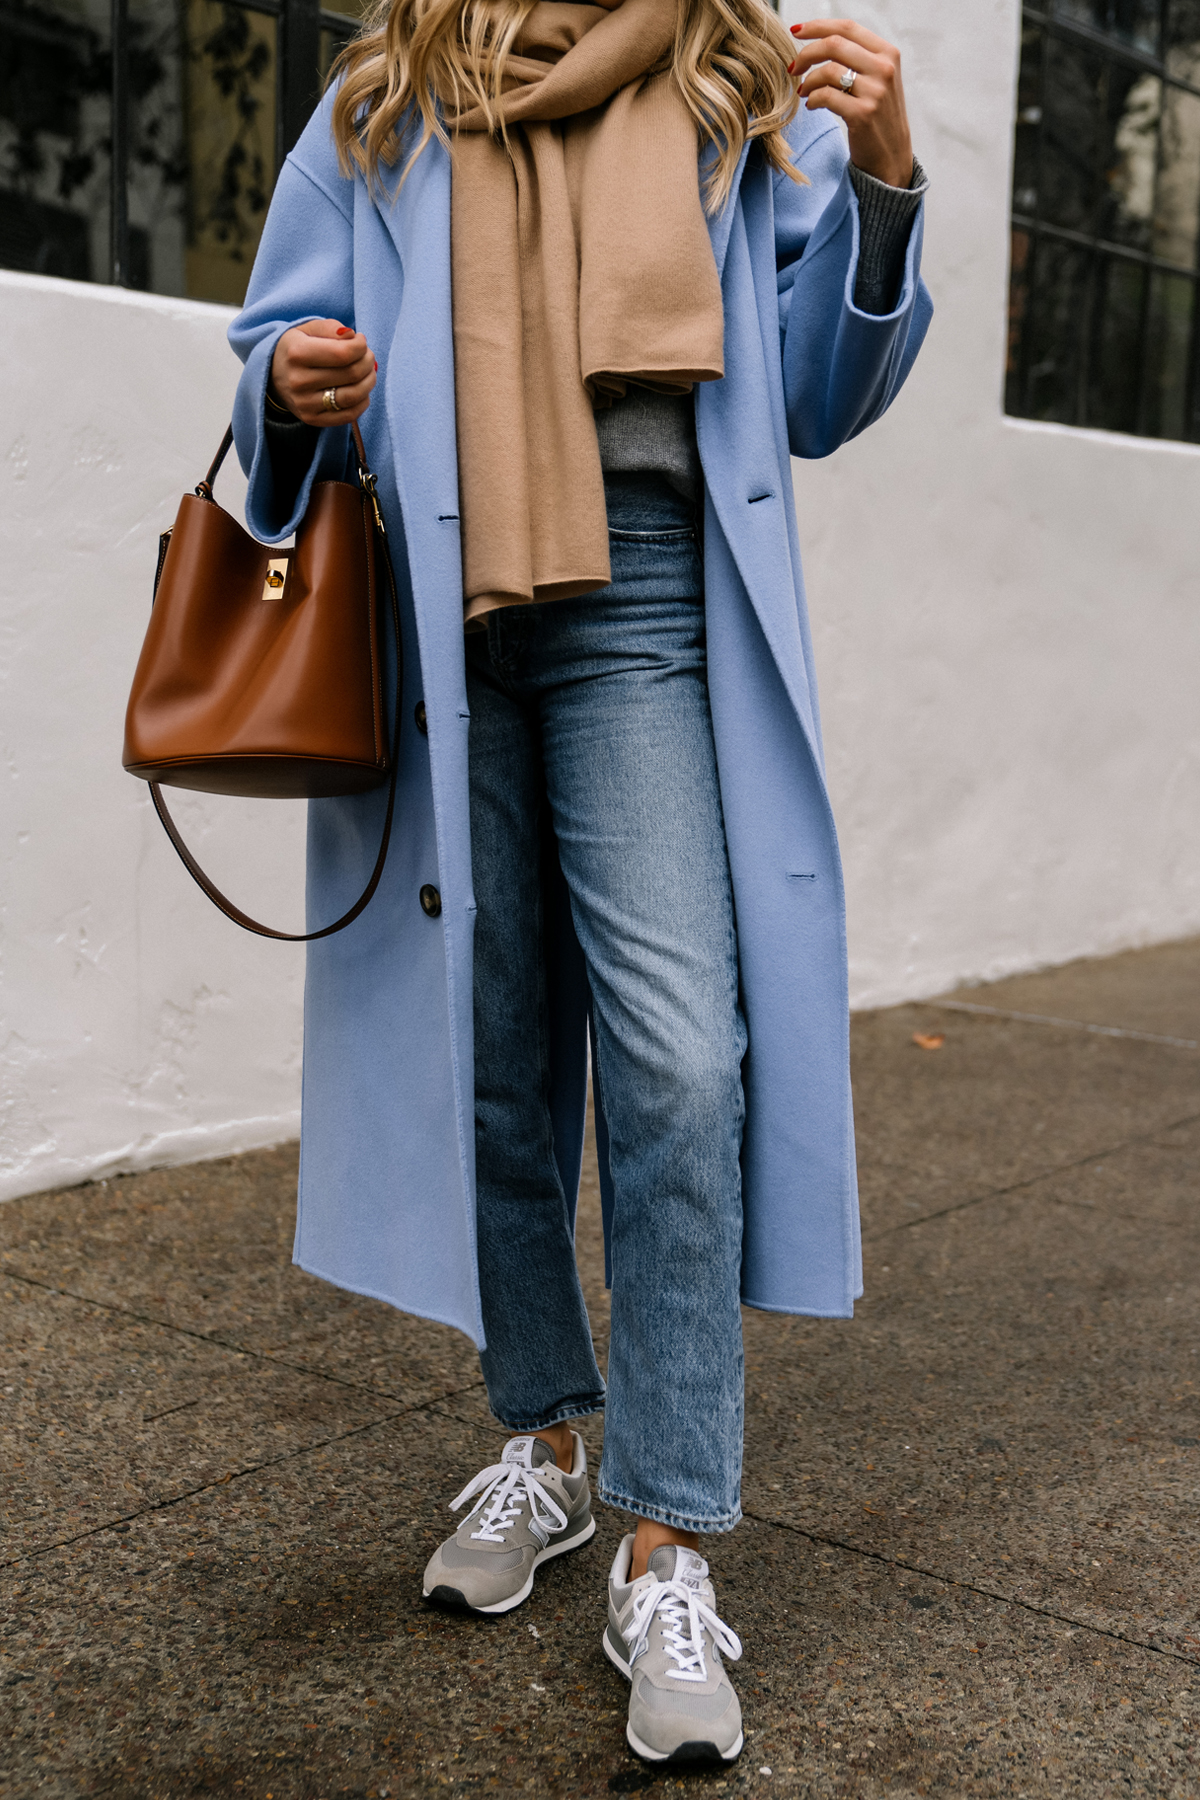 How To Wear Your Winter Coat With Sneakers - Fashion Jackson